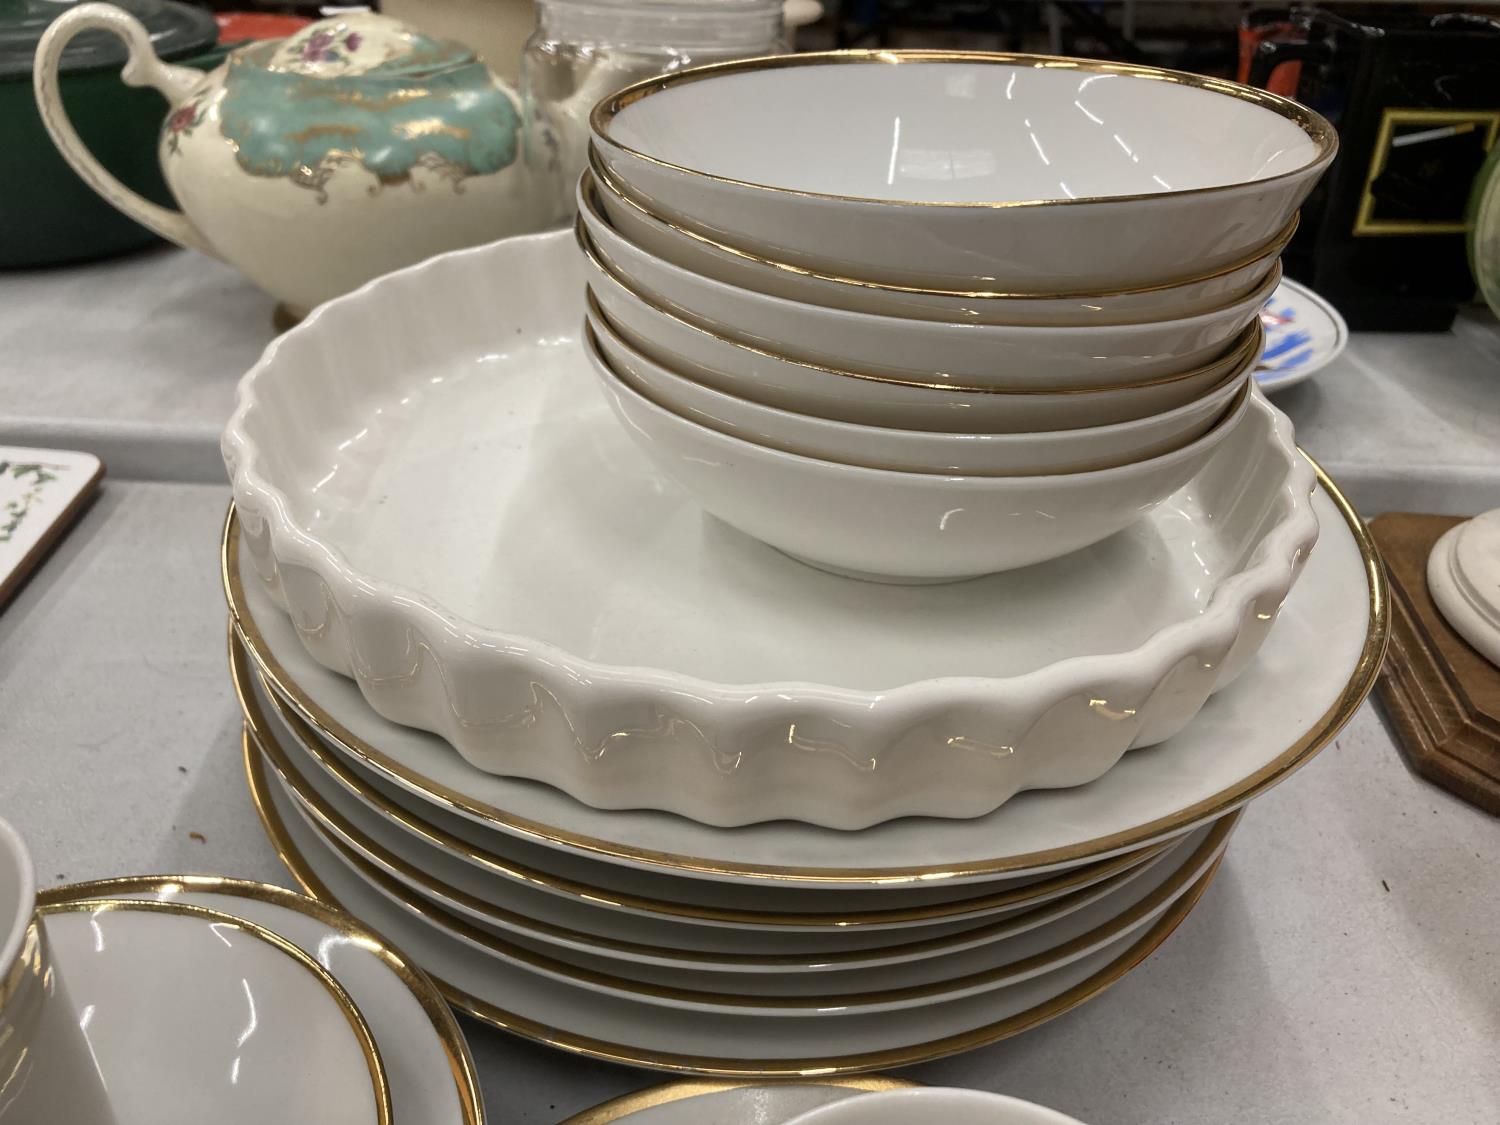 AN ESCHENBACH GERMAN PART DINNER SERVICE TO INCLUDE VARIOUS SIZED PLATES, BOWLS, CUPS, SAUCERS, ETC - Image 3 of 4